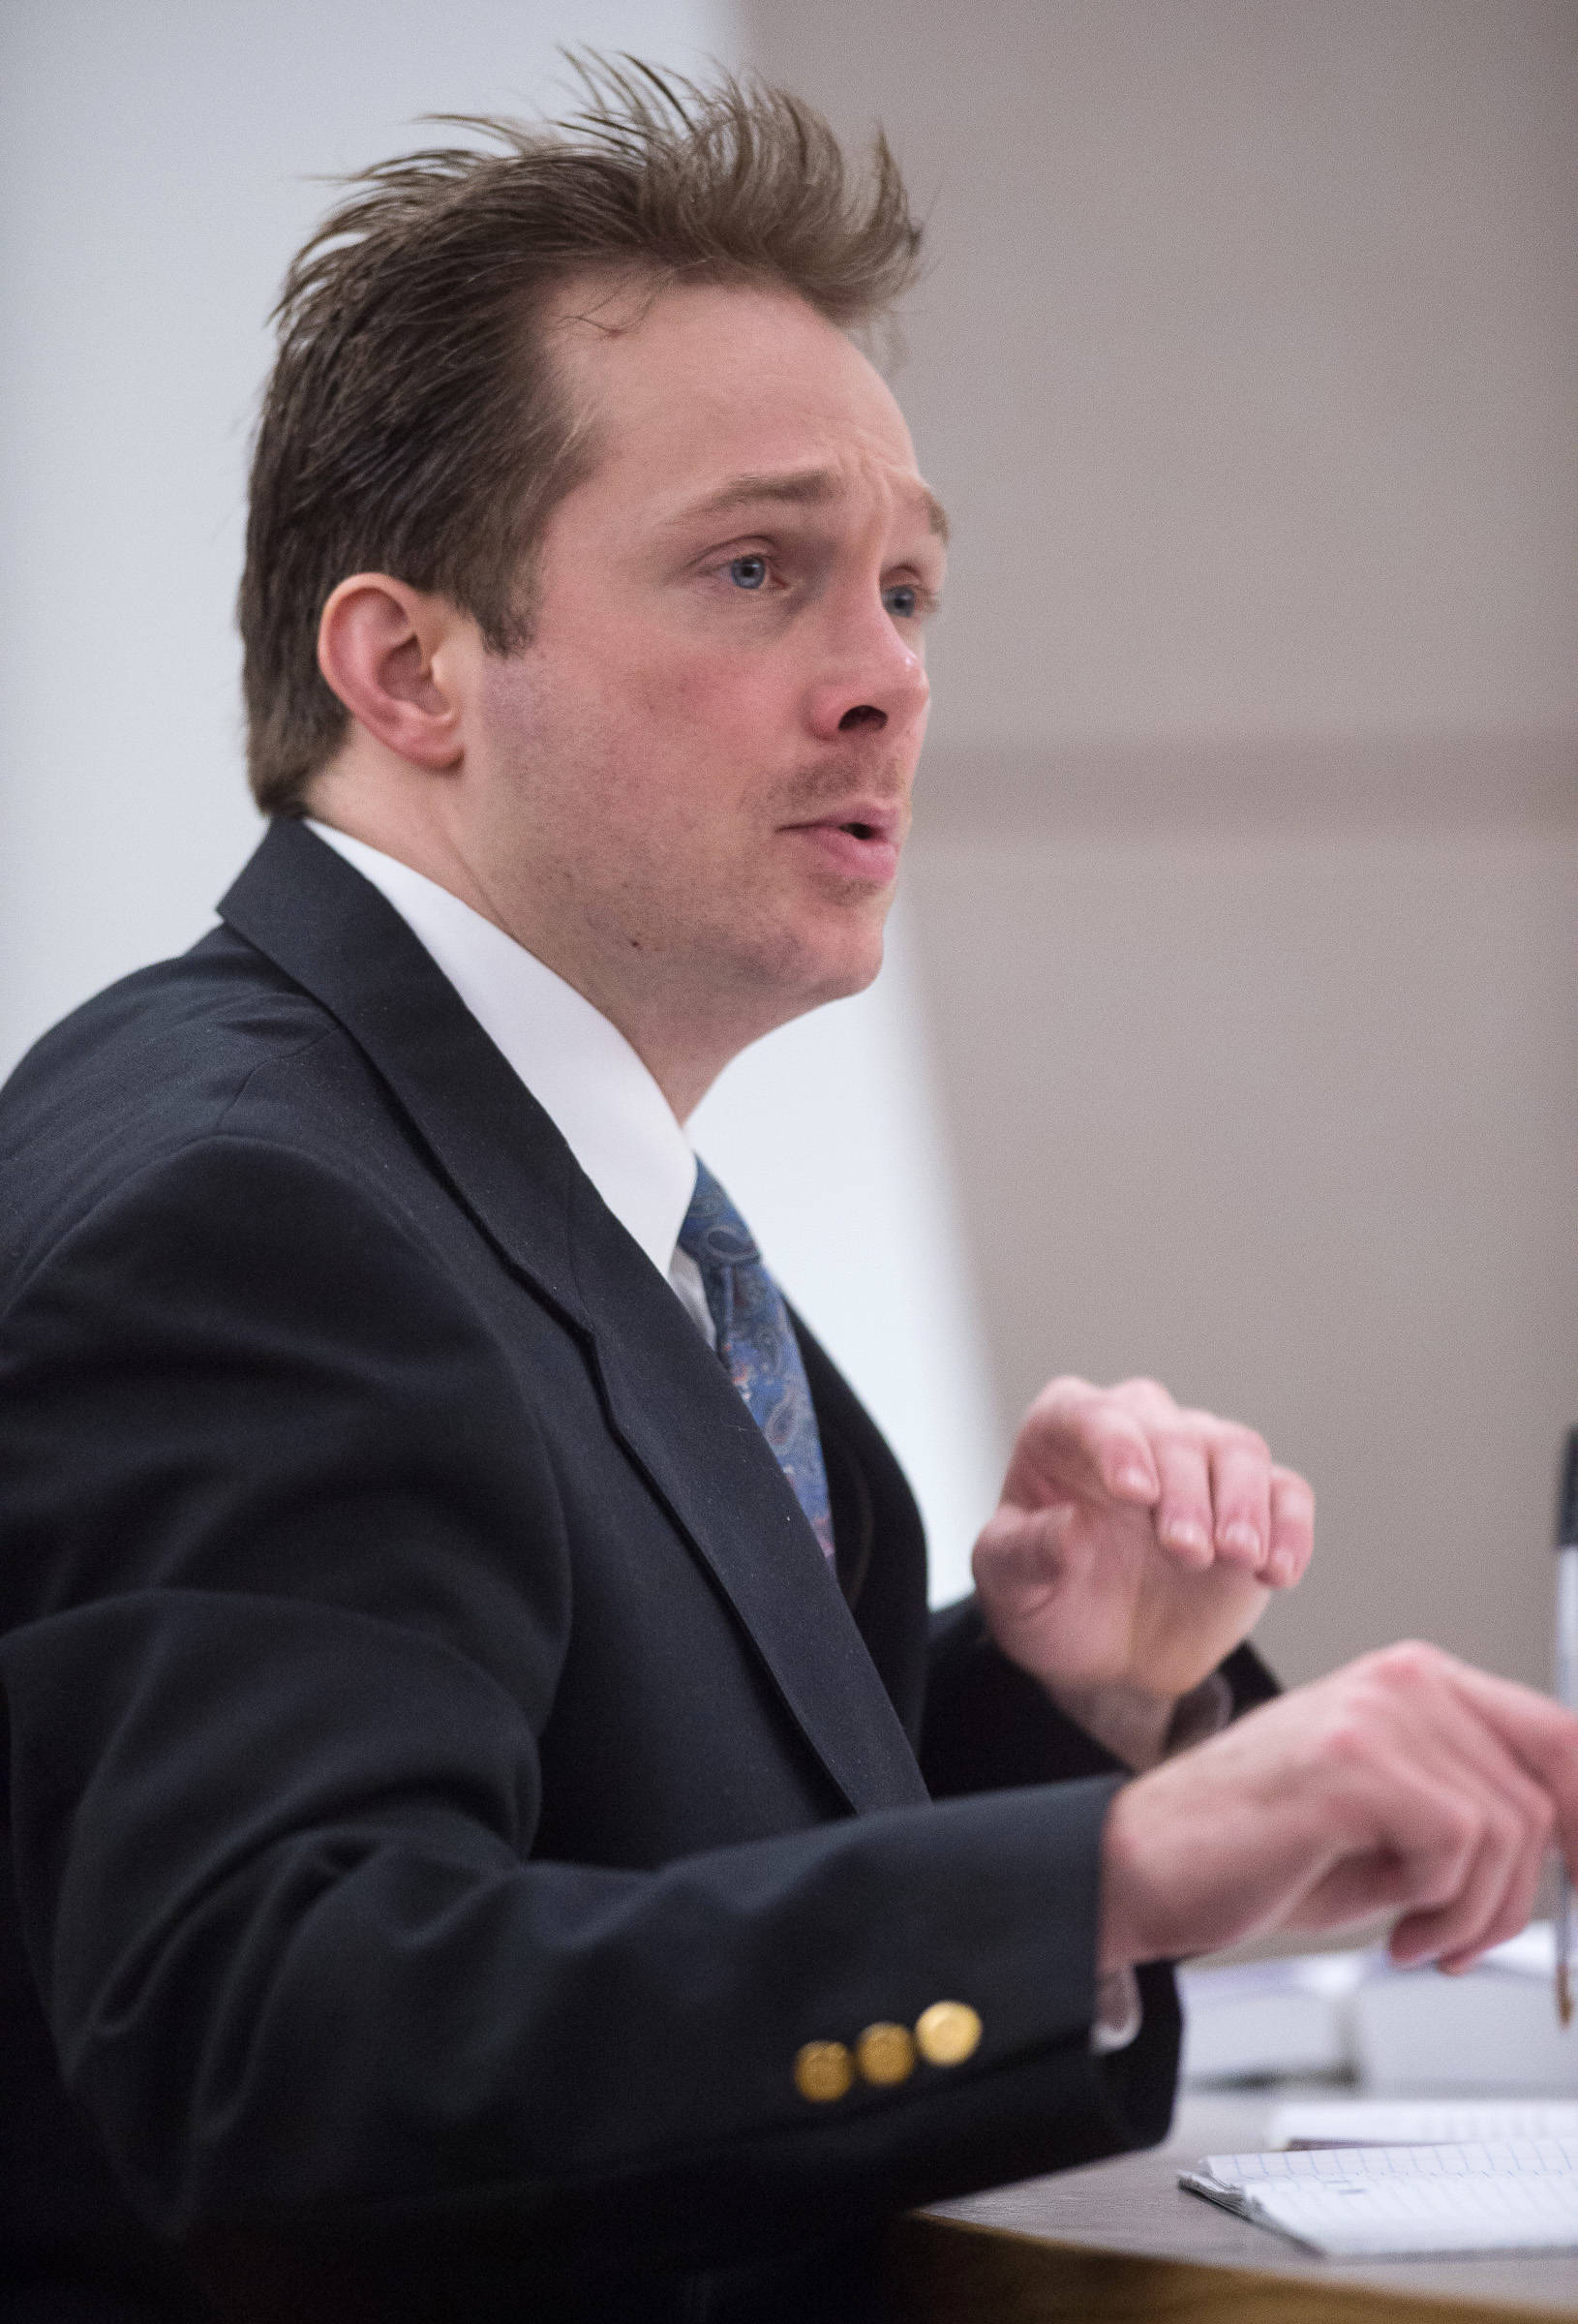 Christopher Strawn raises an objection against Juneau Assistant District Attorney Amy Paige’s question of a witness at his trial in Juneau Superior Court on Friday, Oct. 6, 2017. Strawn, 34, faces charges of first-degree and second-degree murder, manslaughter, criminally negligent homicide, third-degree assault and weapons misconduct in the shooting death of Brandon Cook in October 2015. (Michael Penn | Juneau Empire)